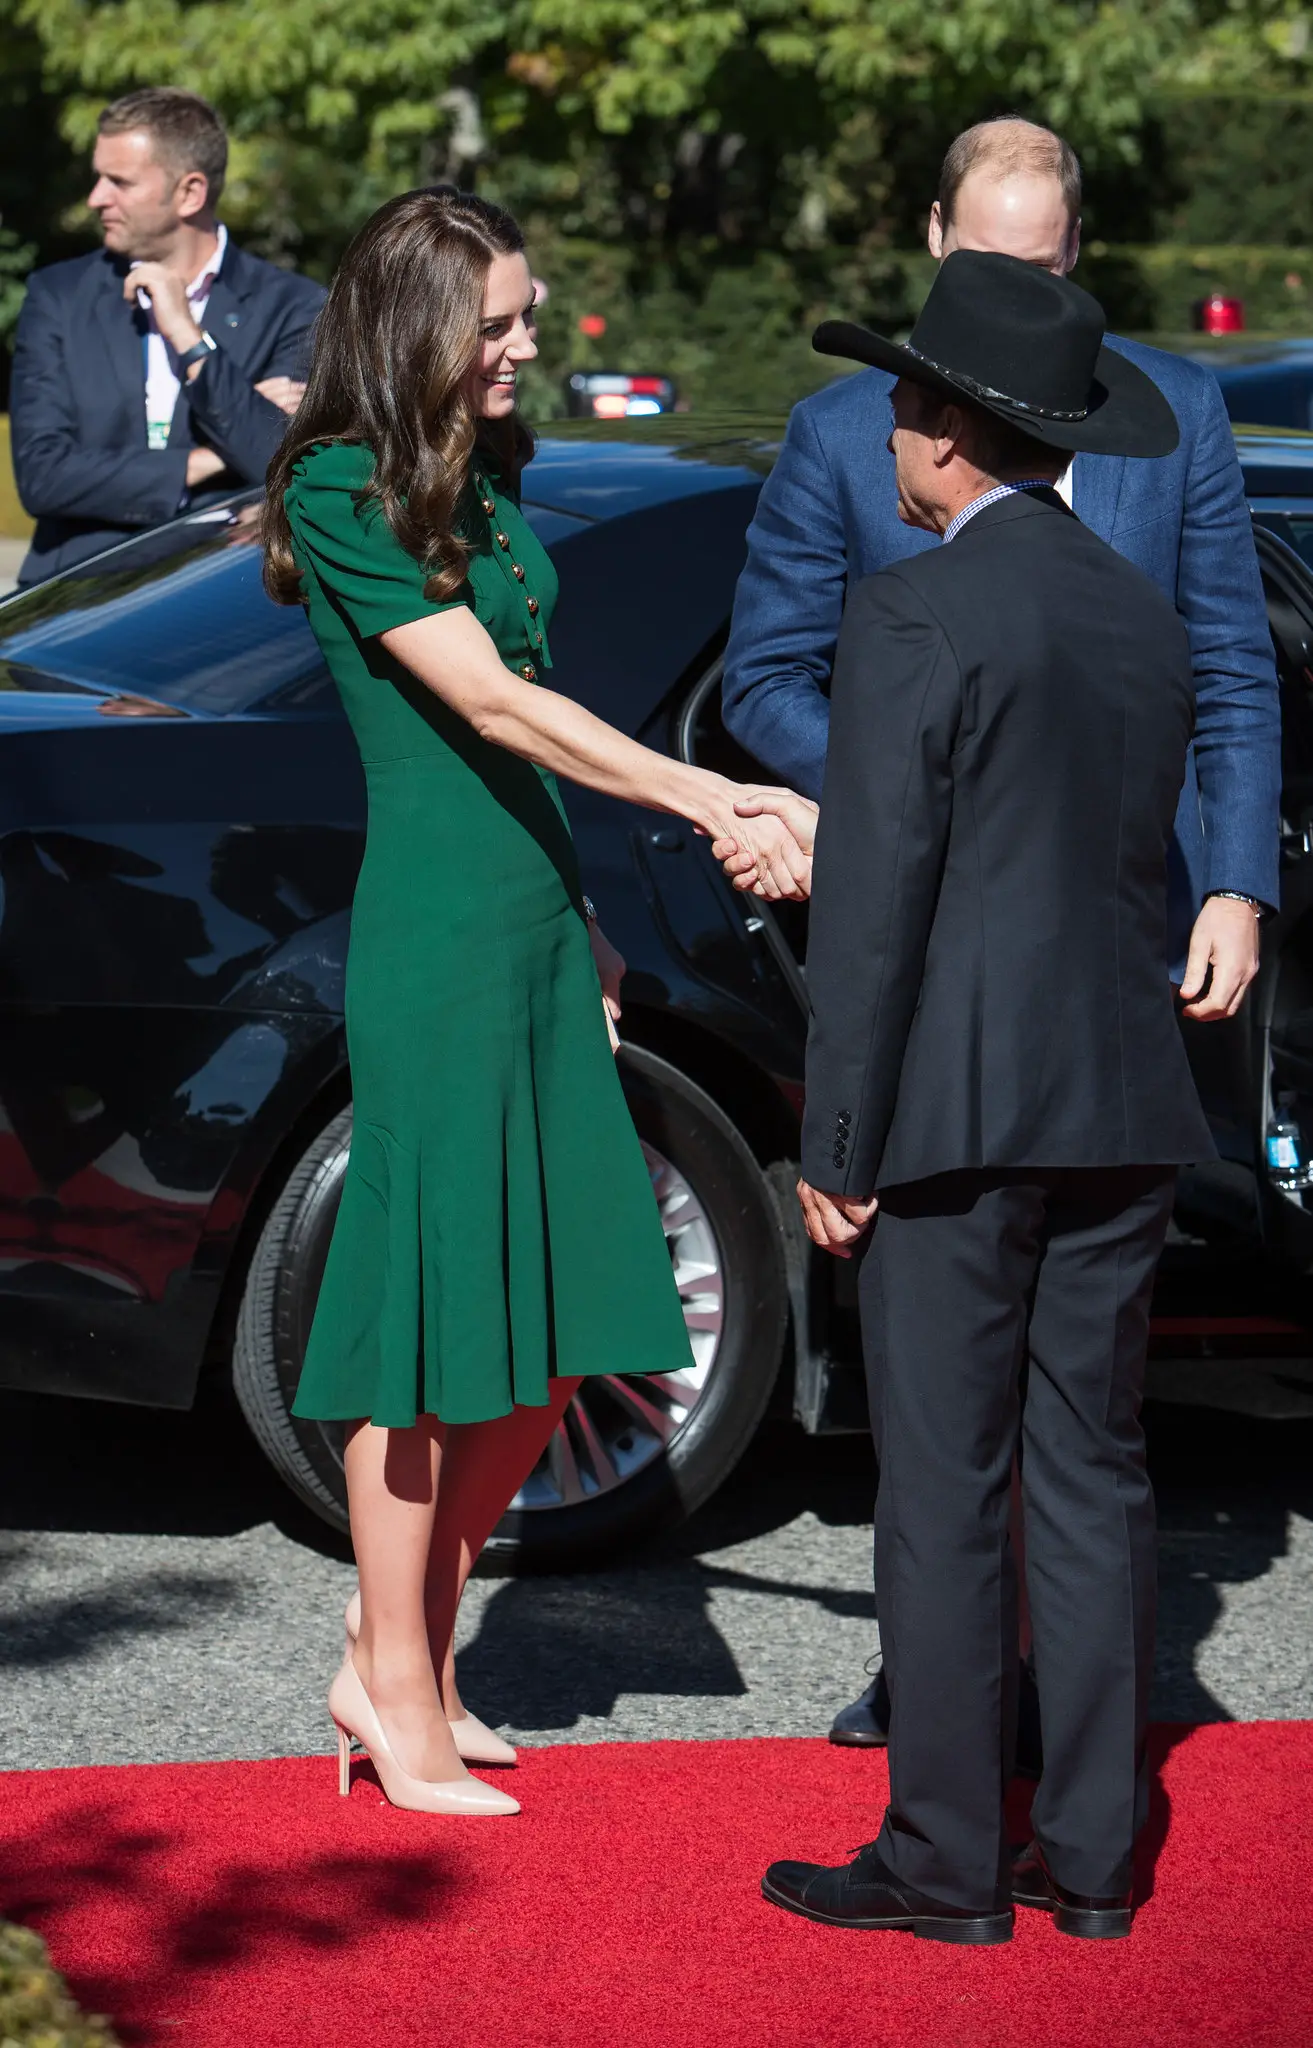 The Duchess of Cambridge in green Dolce and Gabbana dress during kelowna visit in 2016